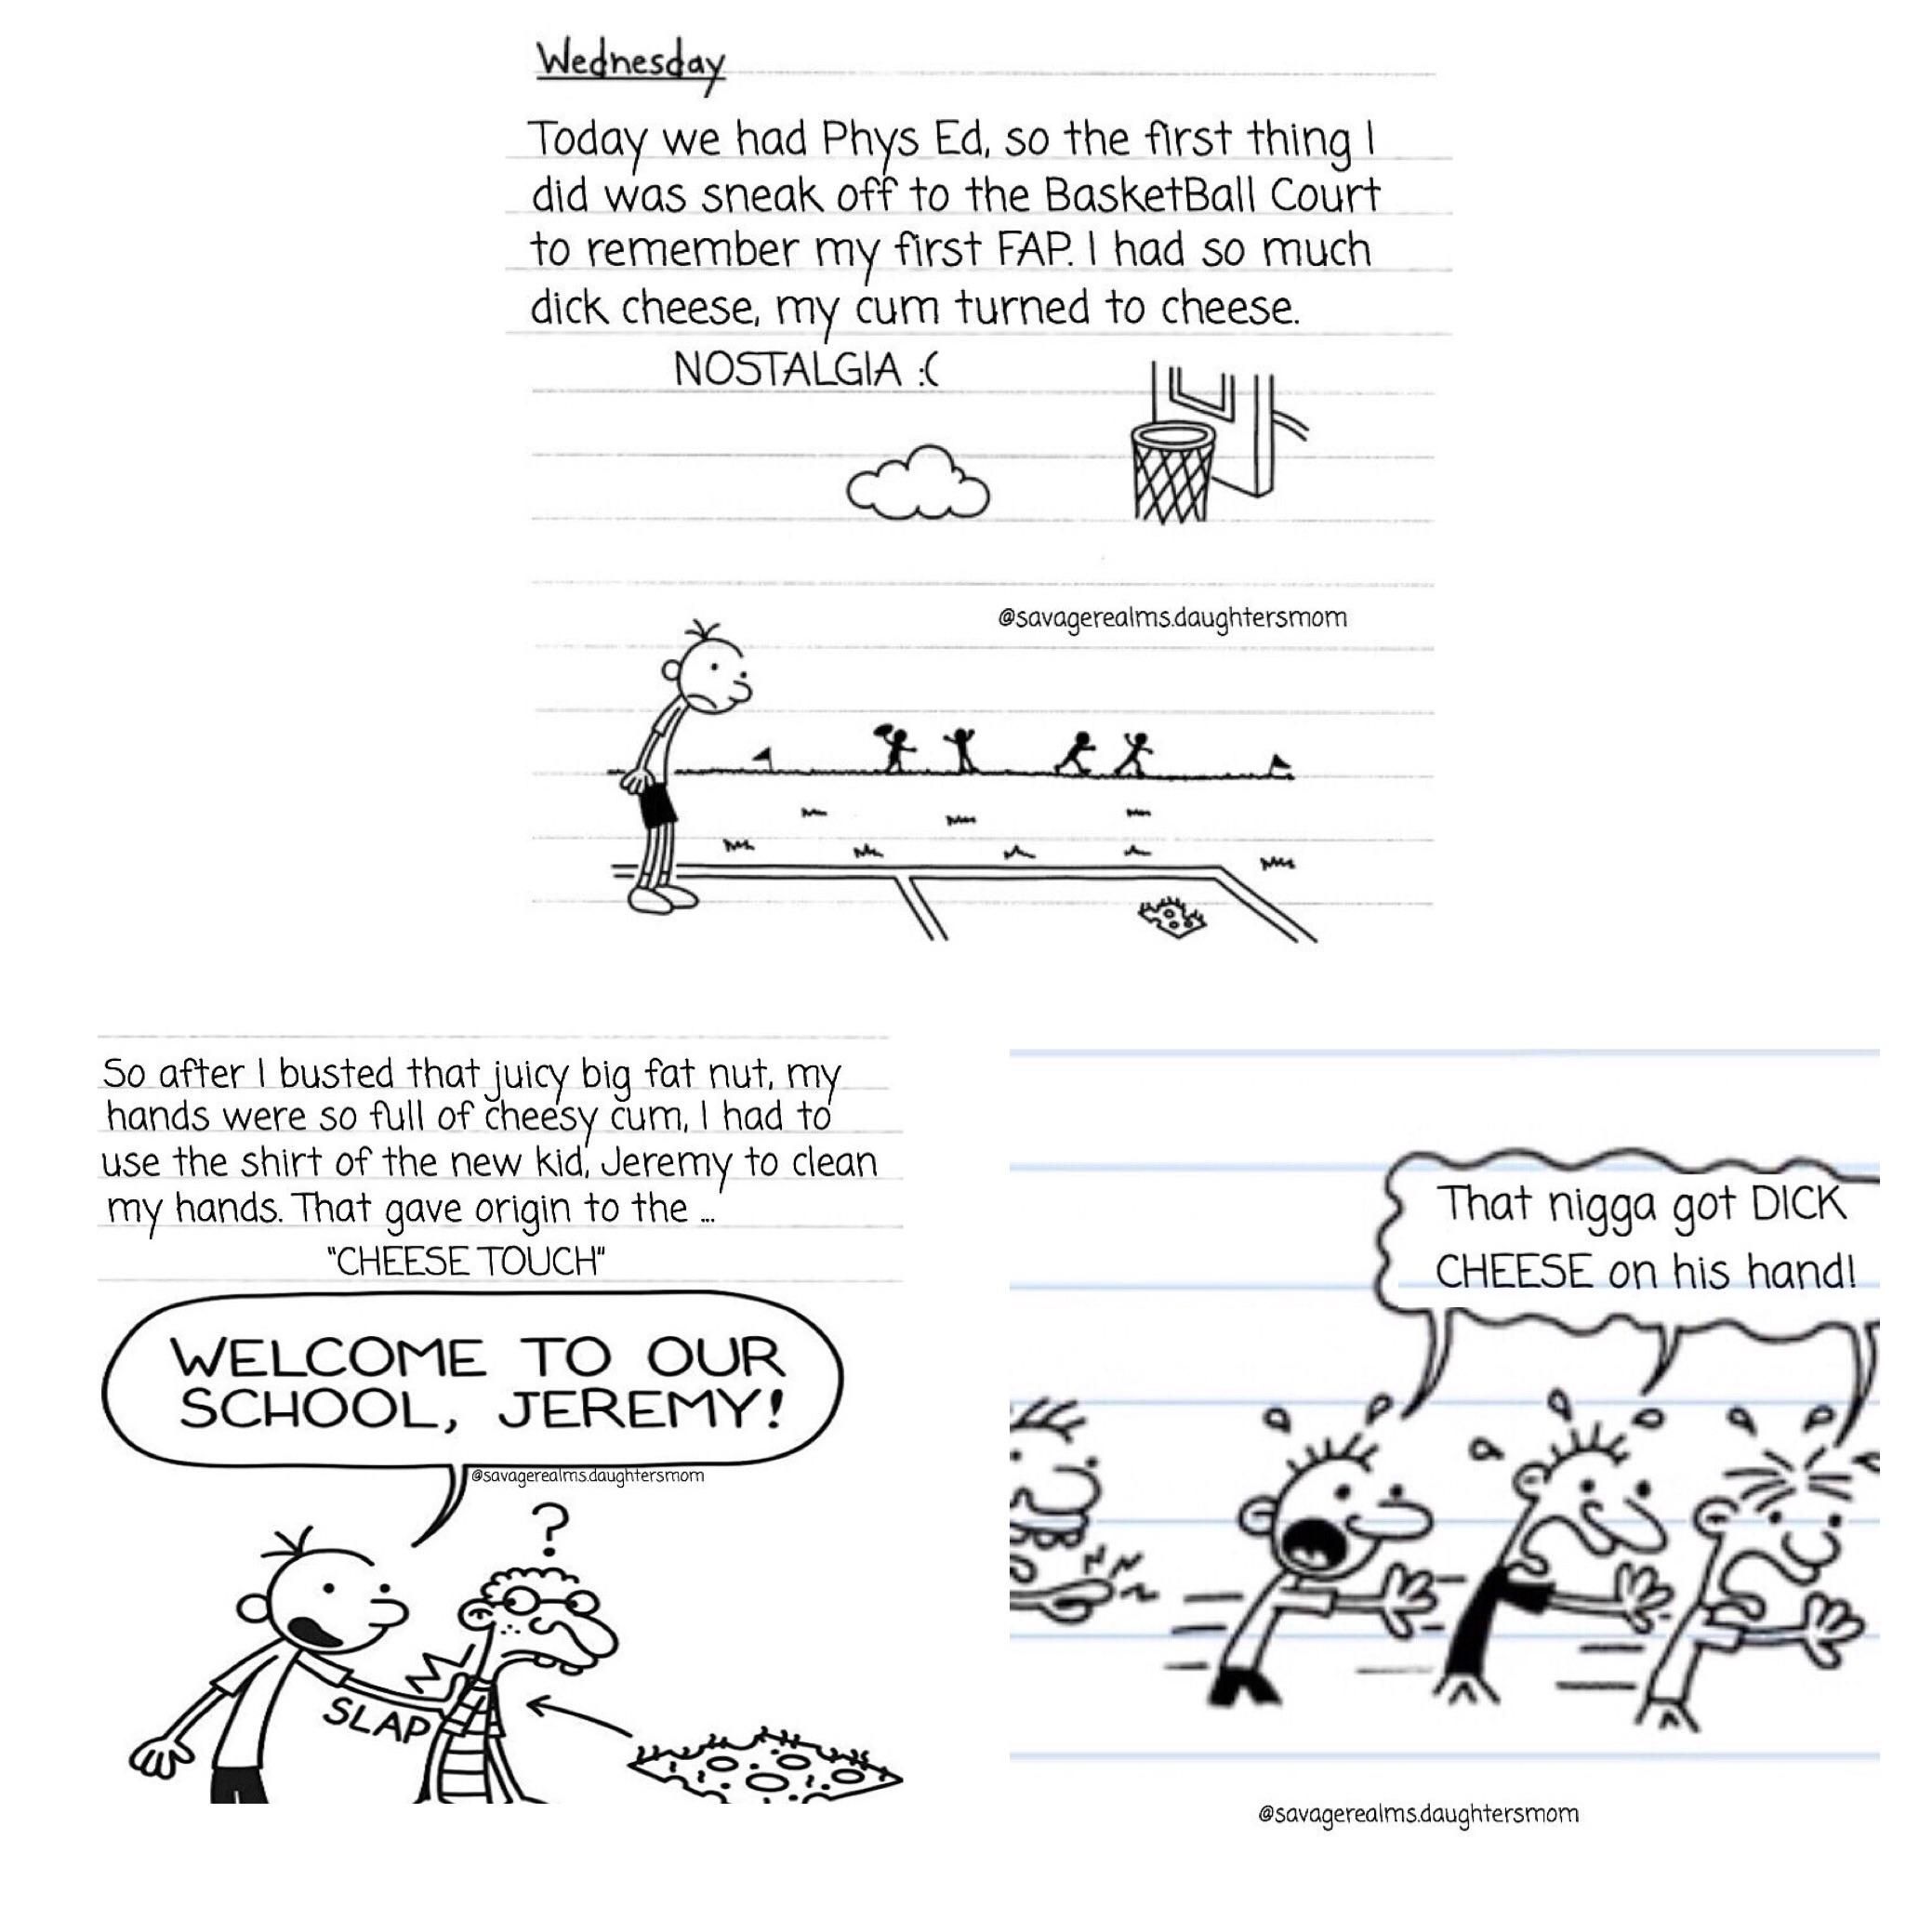 classic wimpy kid moment